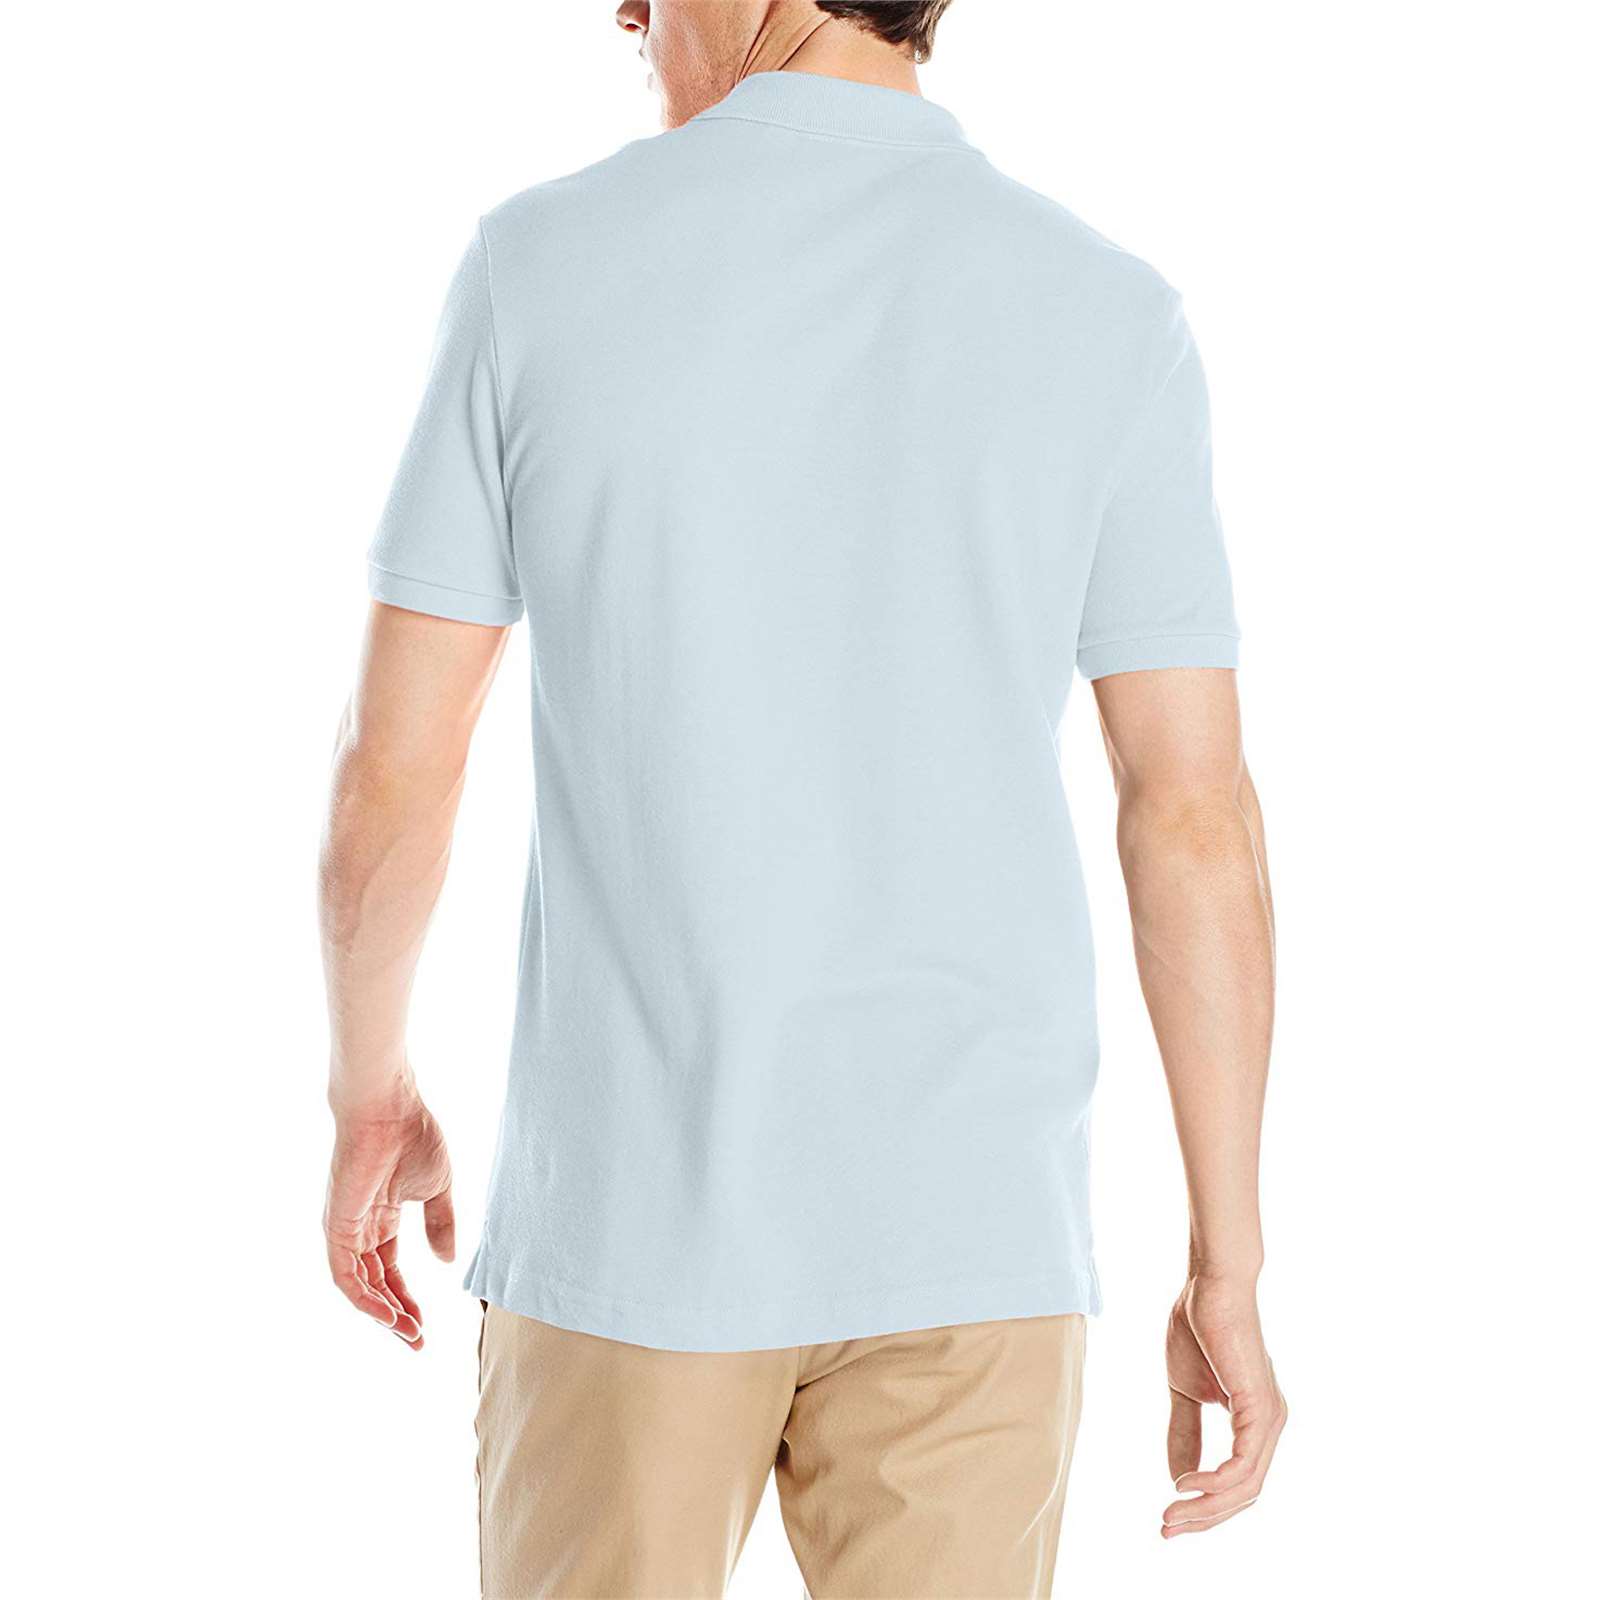 Lacoste Men Classic Pique Slim Fit Short Sleeve Polo - image 2 of 2